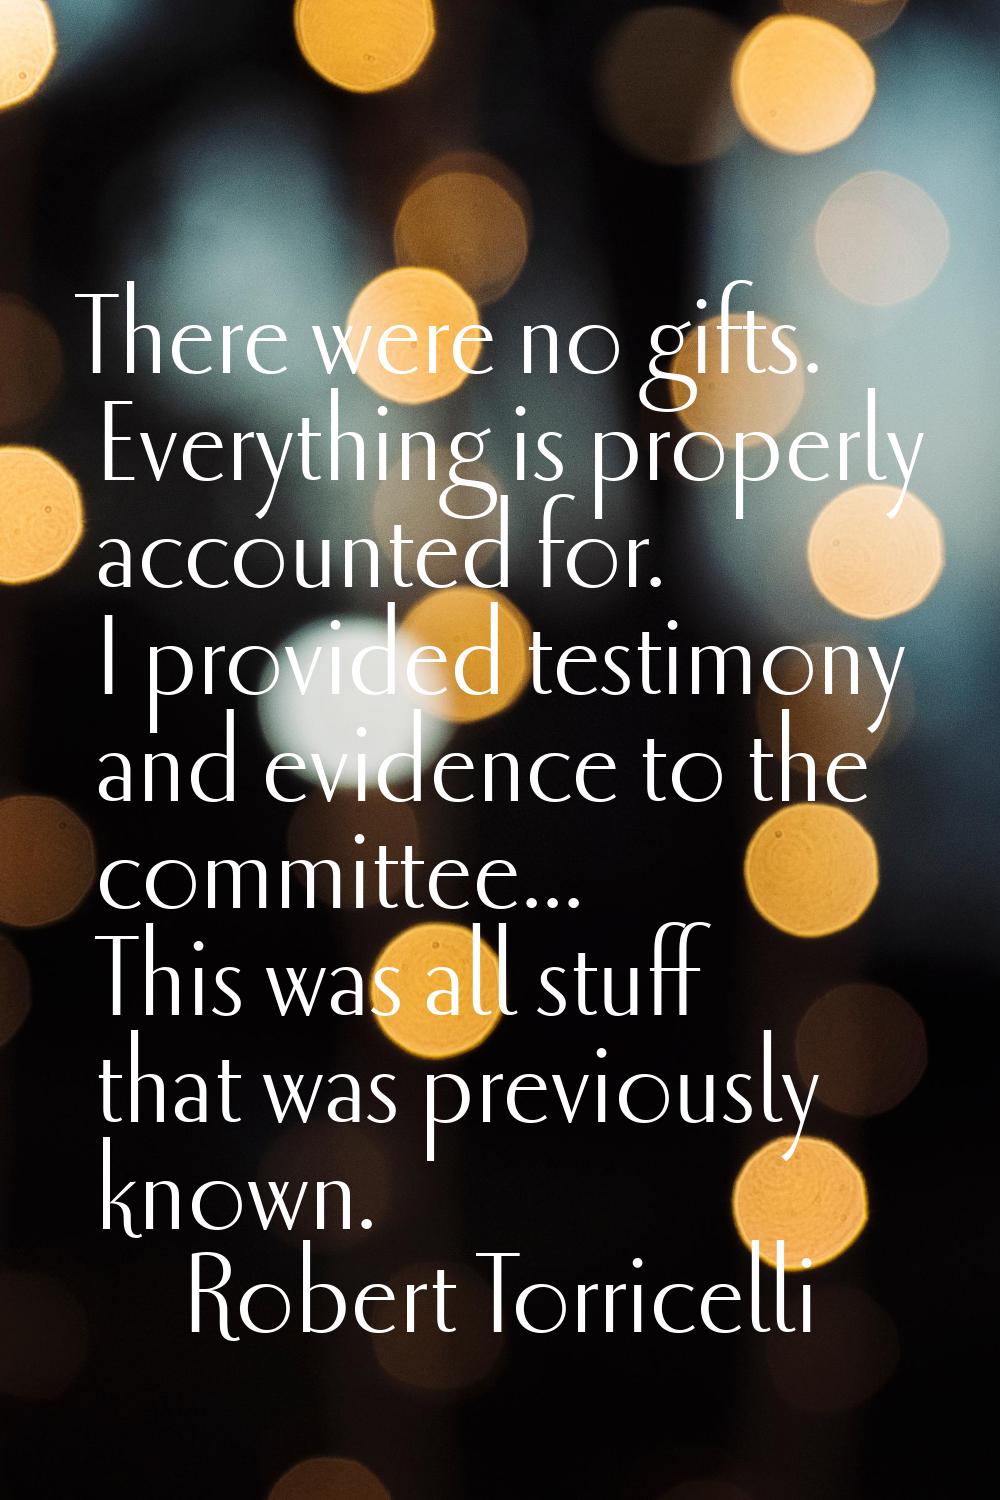 There were no gifts. Everything is properly accounted for. I provided testimony and evidence to the